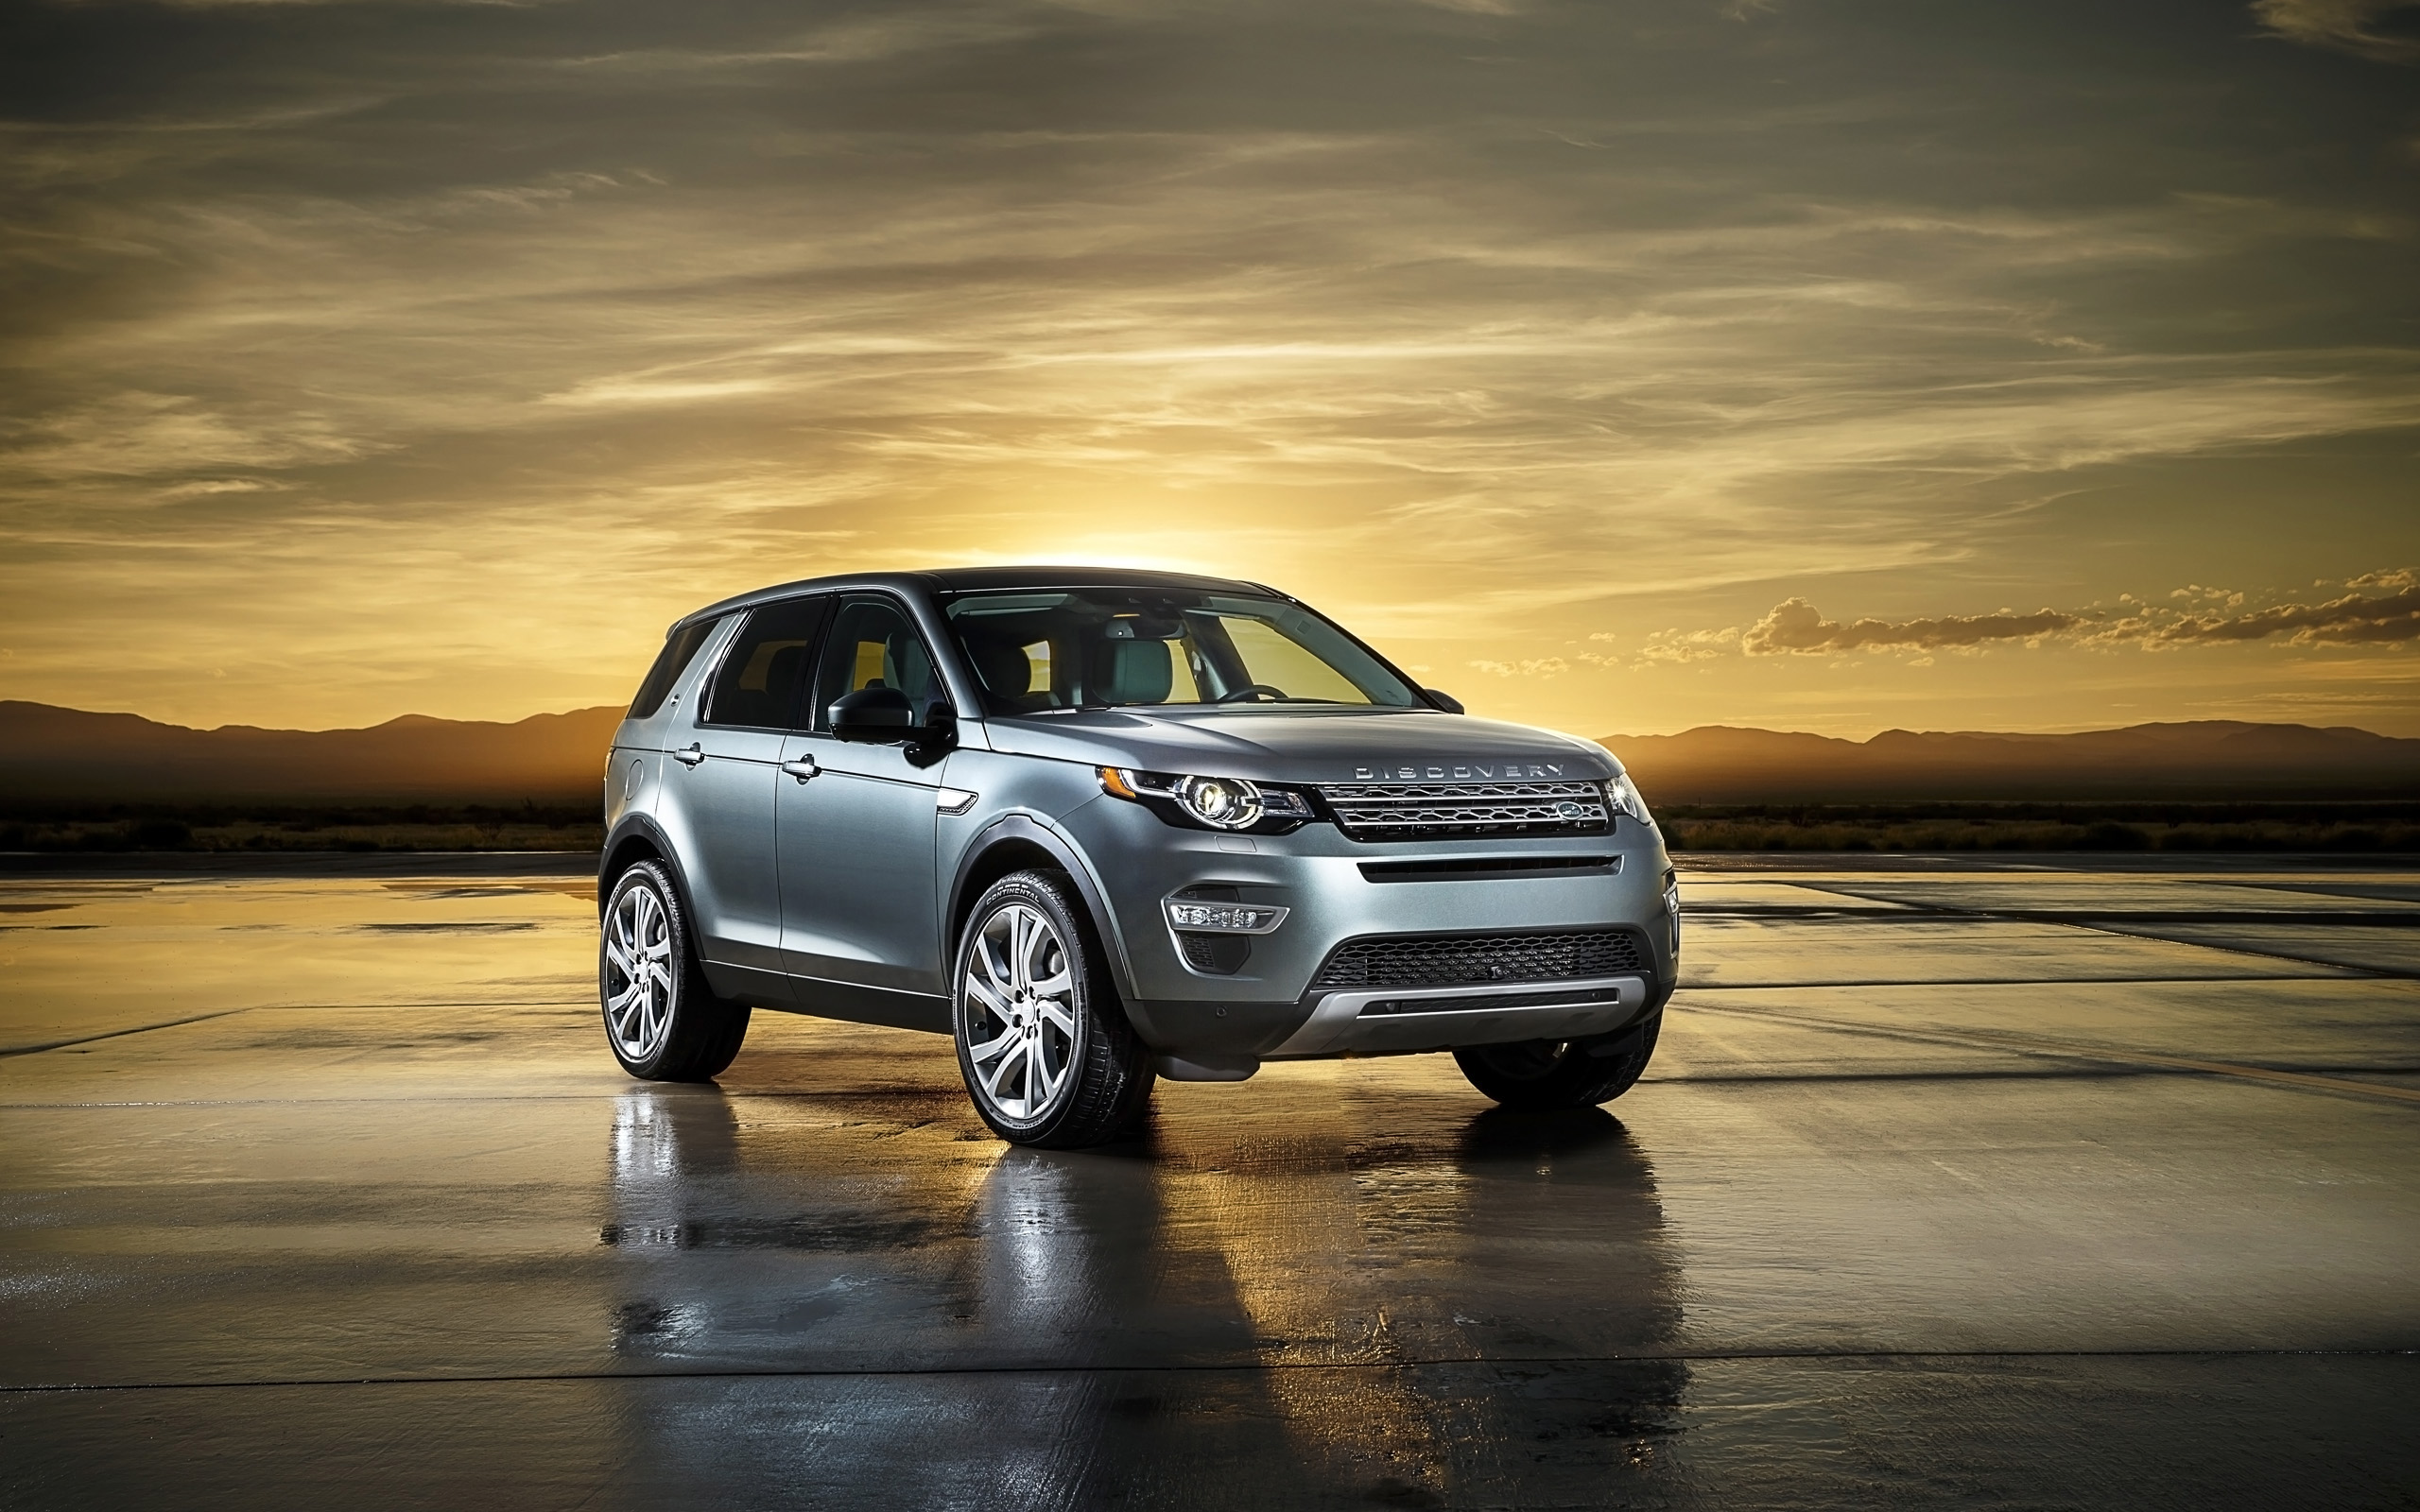 land rover discovery, vehicles, land rover discovery sport, land rover